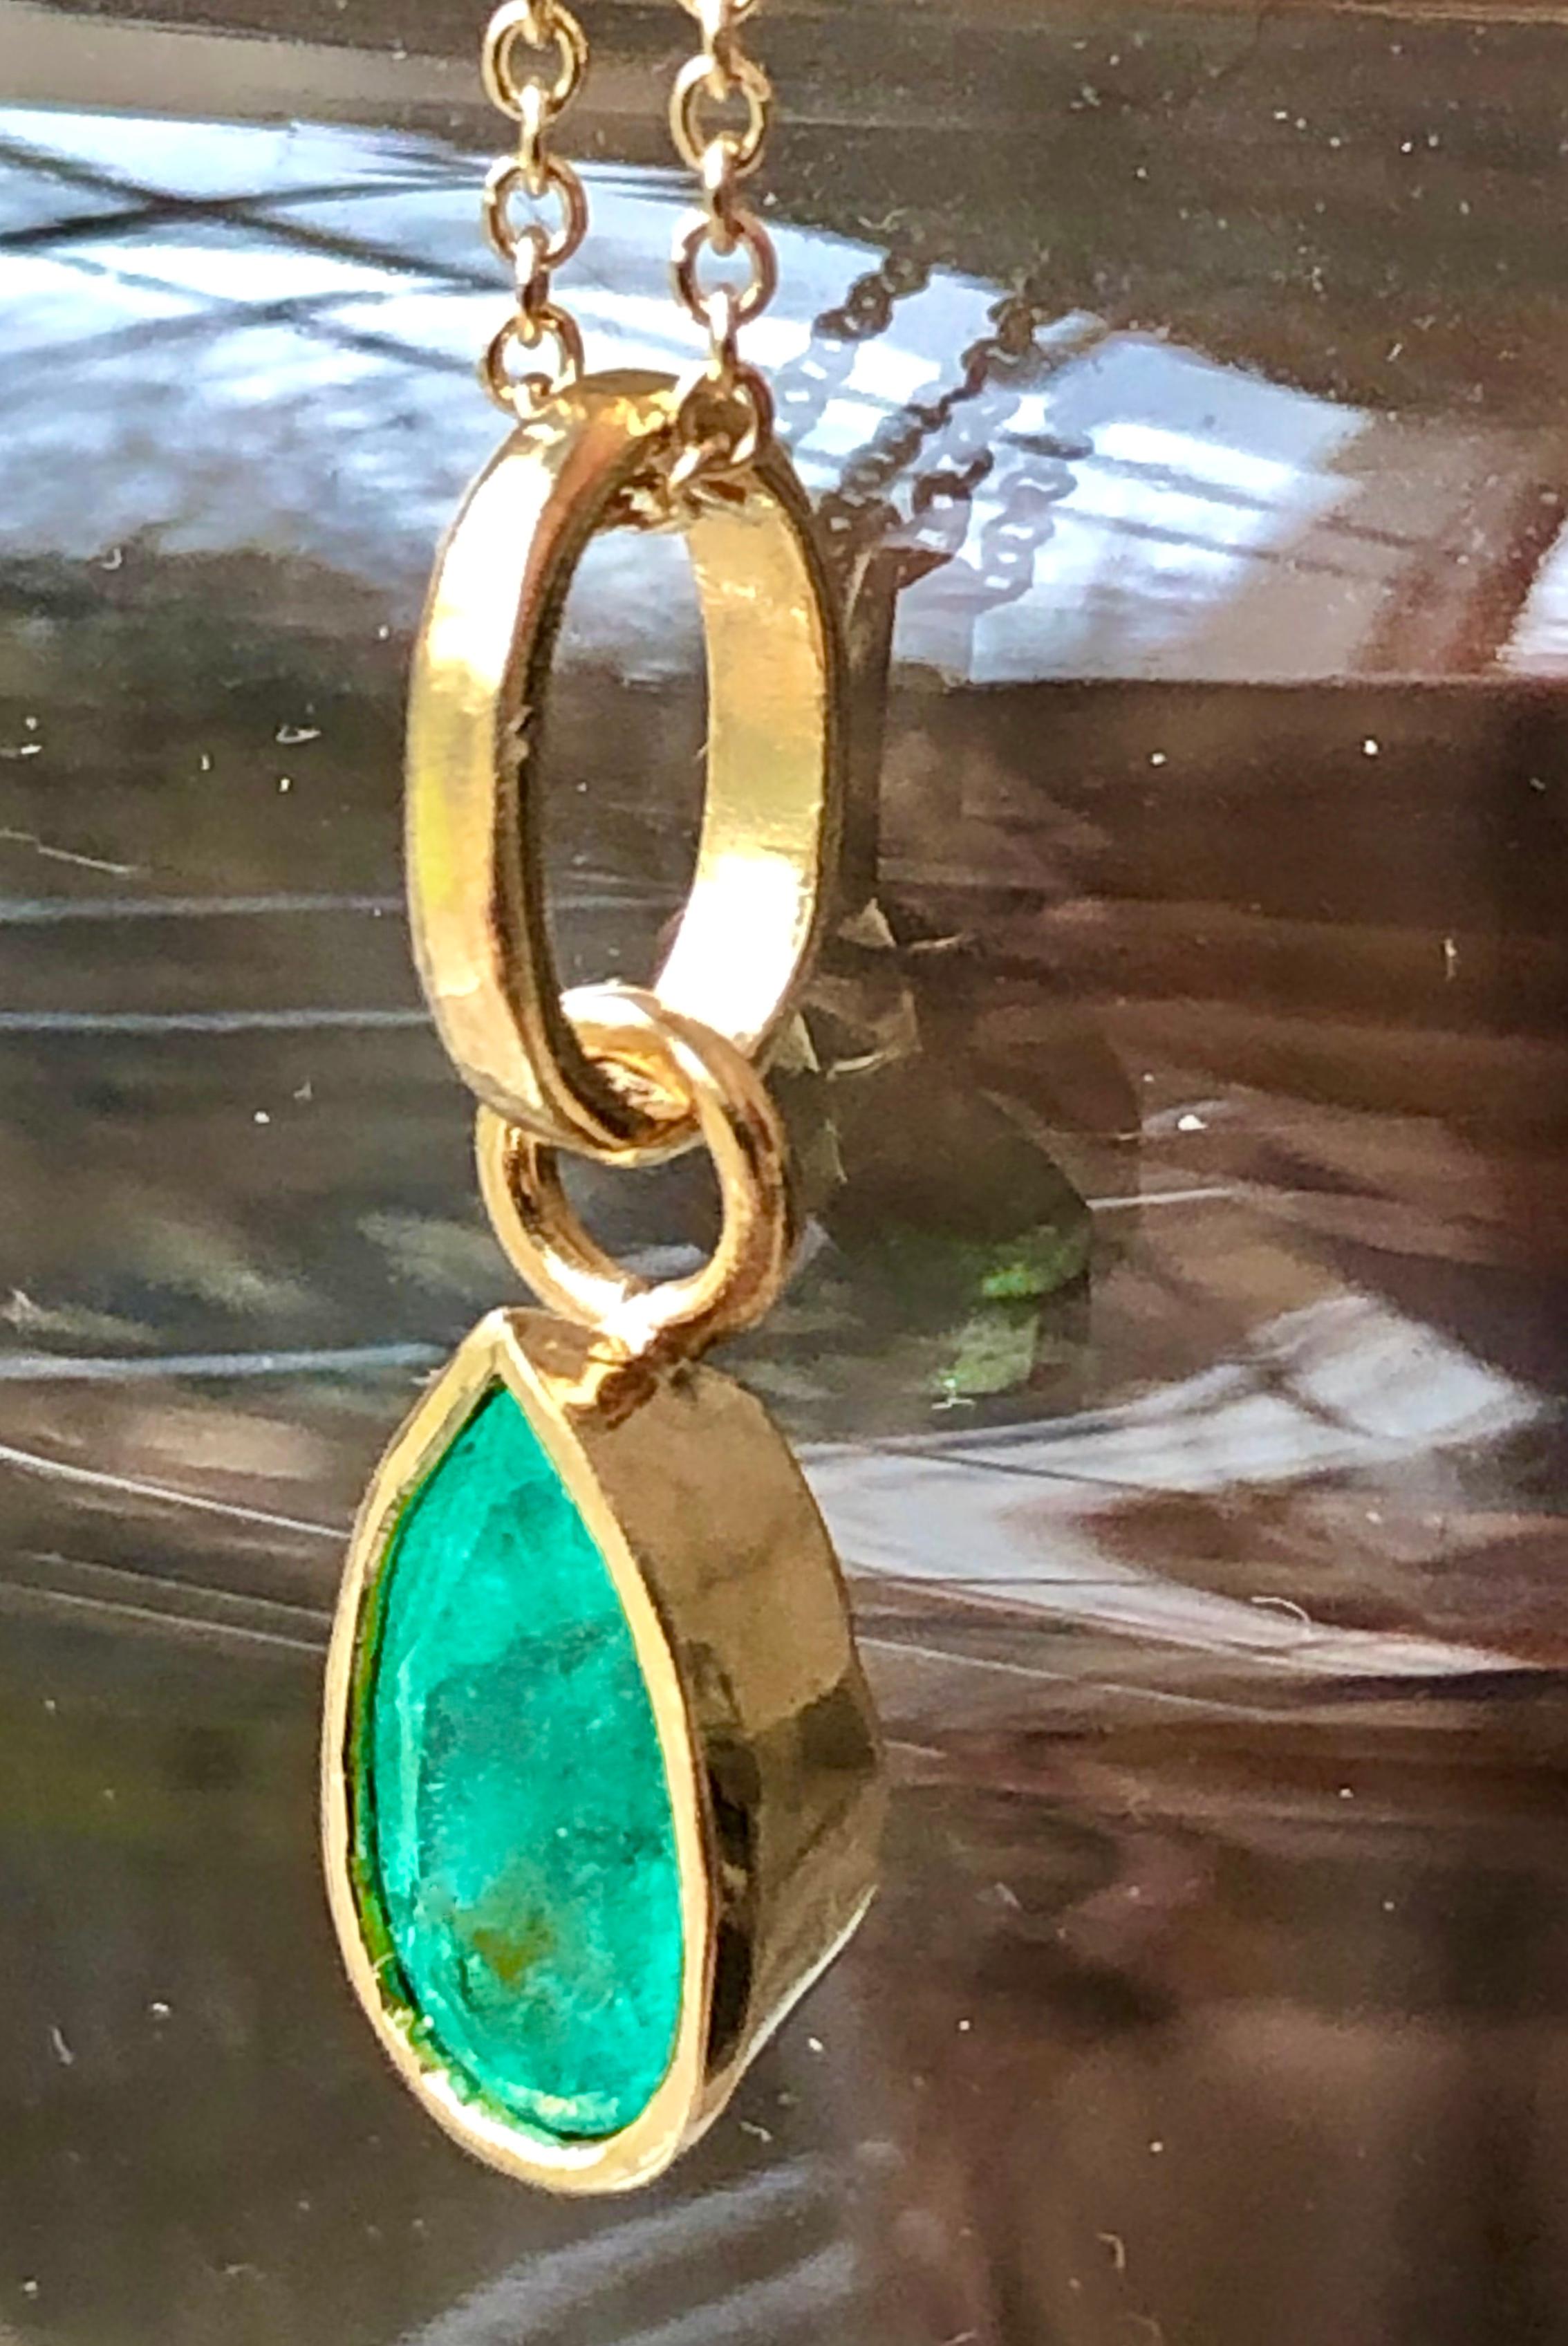 Shimmering emerald charm drop pendant bezel set Colombian emerald pear cut. All natural.
featuring one genuine and natural pear-cut Colombian emerald, approx. 1.00 carat, glimmering perfect medium Intense green color, clarity VS. The pendant is made